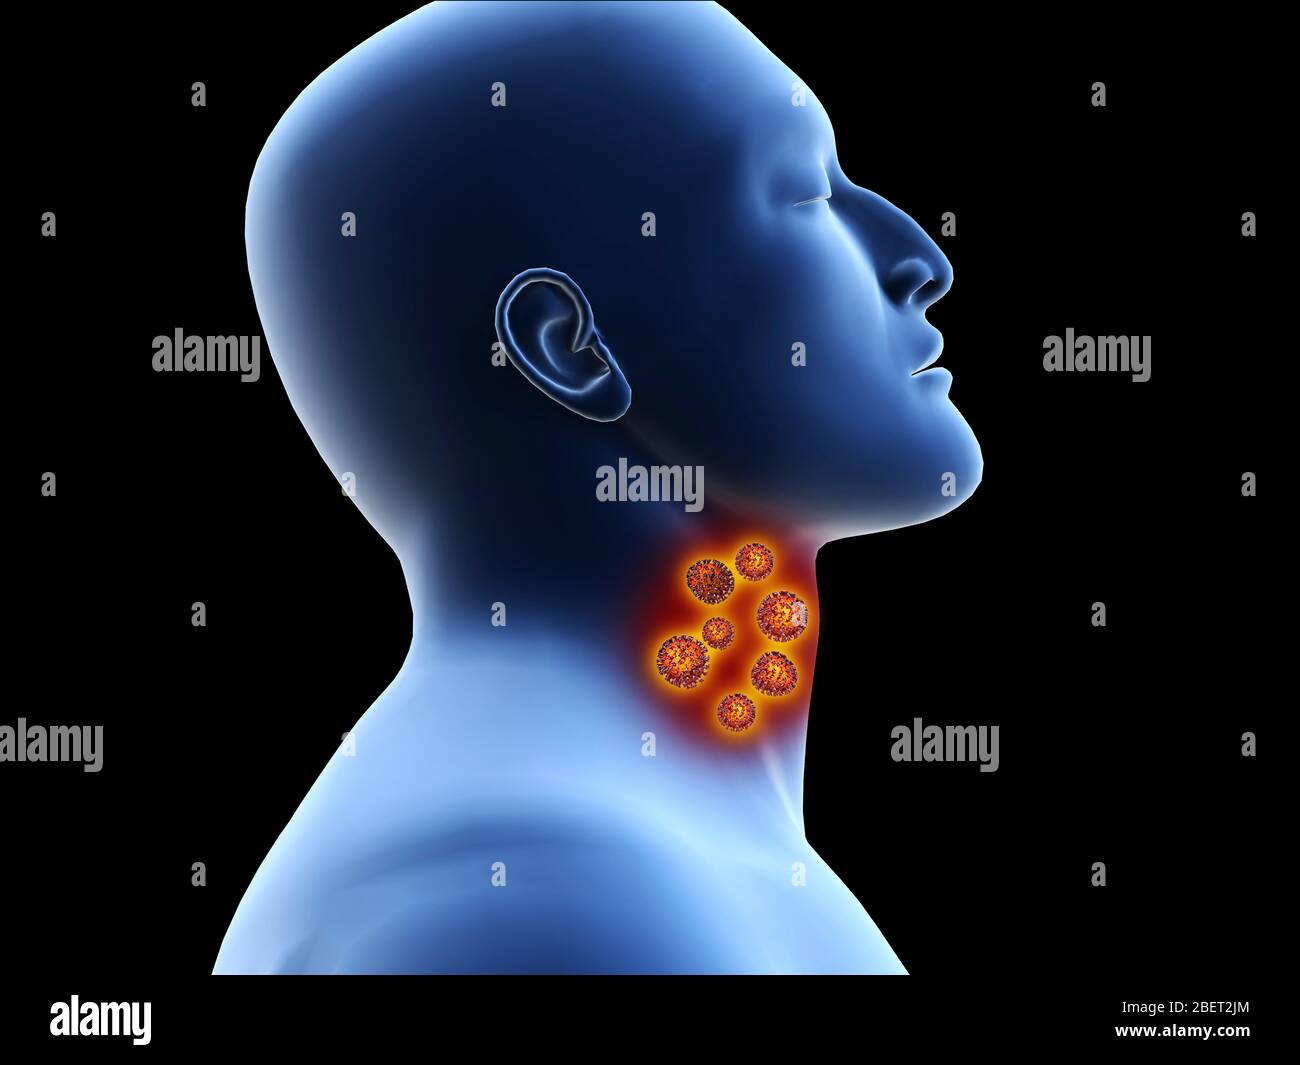 Illustrative concept of coronavirus in the human throat, before entering the lungs. Stock Photo